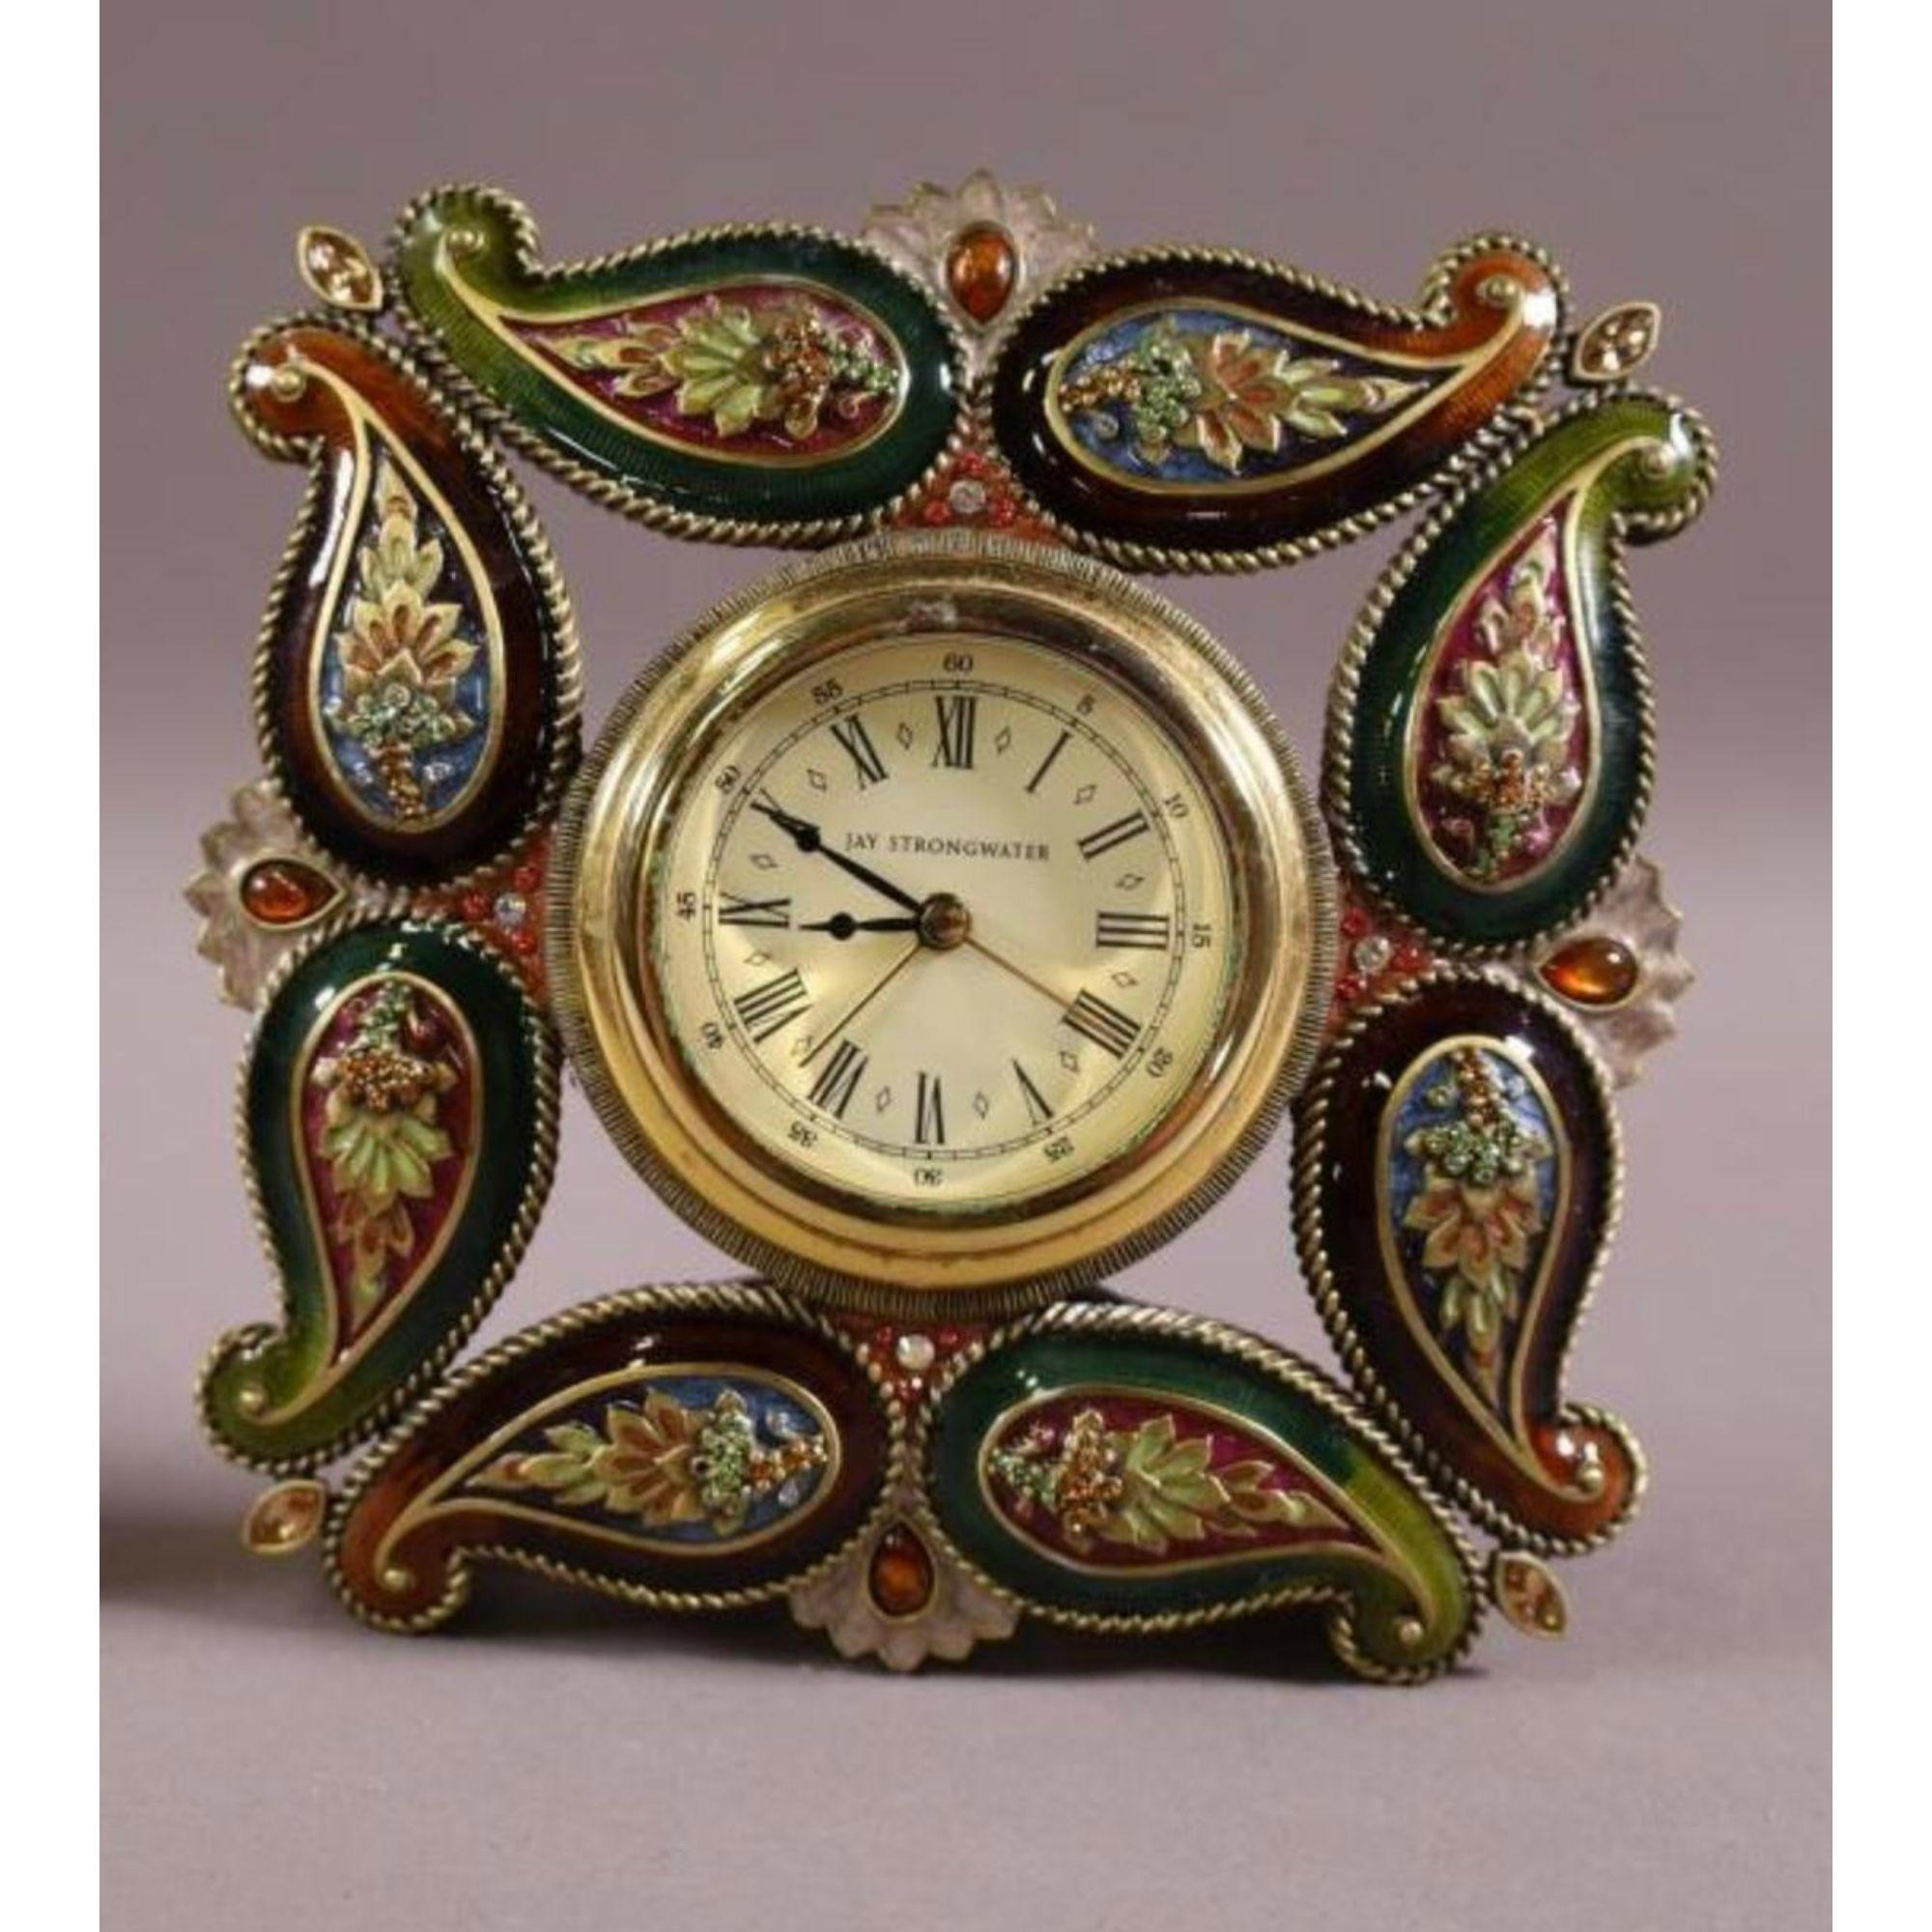 Jay Strongwater Swarovski crystal Enamel clock. It features colorful enamel decoration with Swarovski crystal details.

Additional information: 
Materials: Crystal, Enamel
Color: Green
Period: 2000 - 2009
Styles: French
Item Type: Vintage,